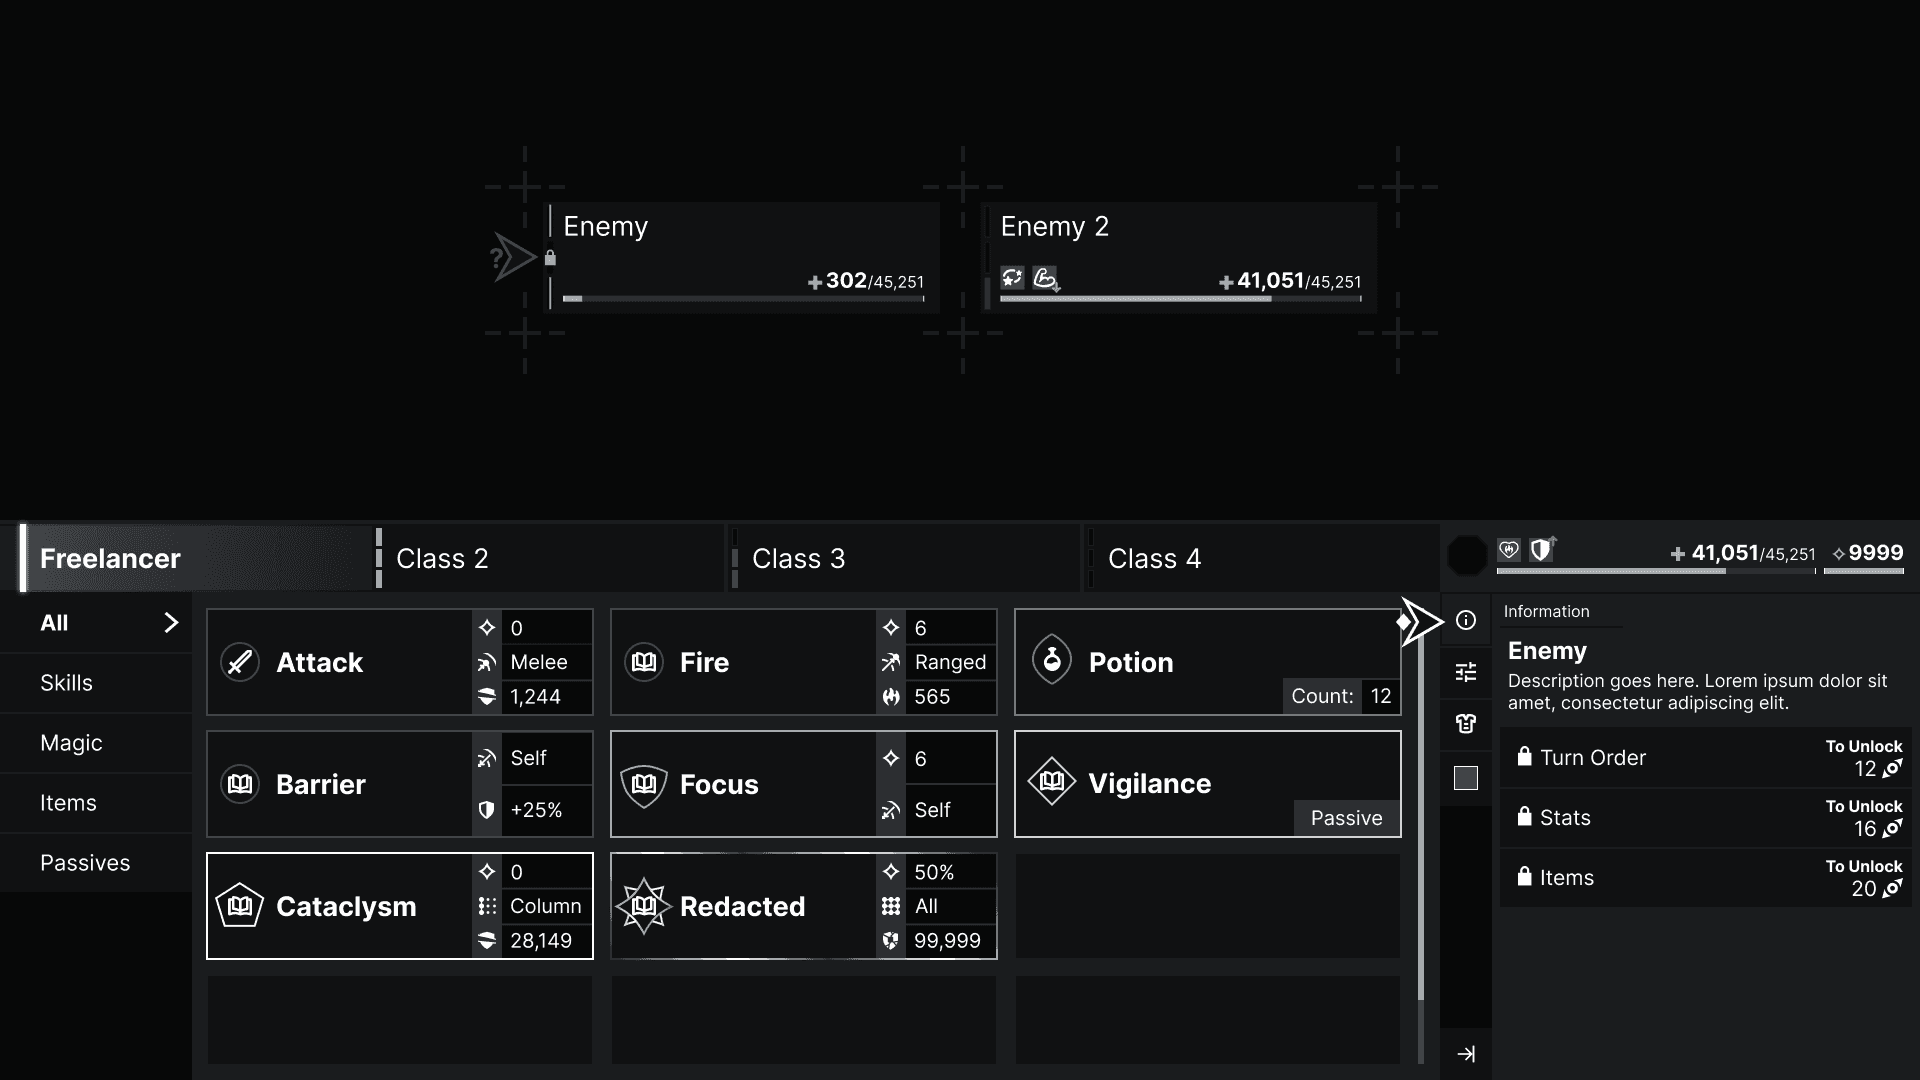 A new mockup of LOARA that rearanges and further refines the previous mockup. It's presented in grayscale and depicts a variety of enemies, player abilities, and player stats in UI elements that would often be seen in an RPG.